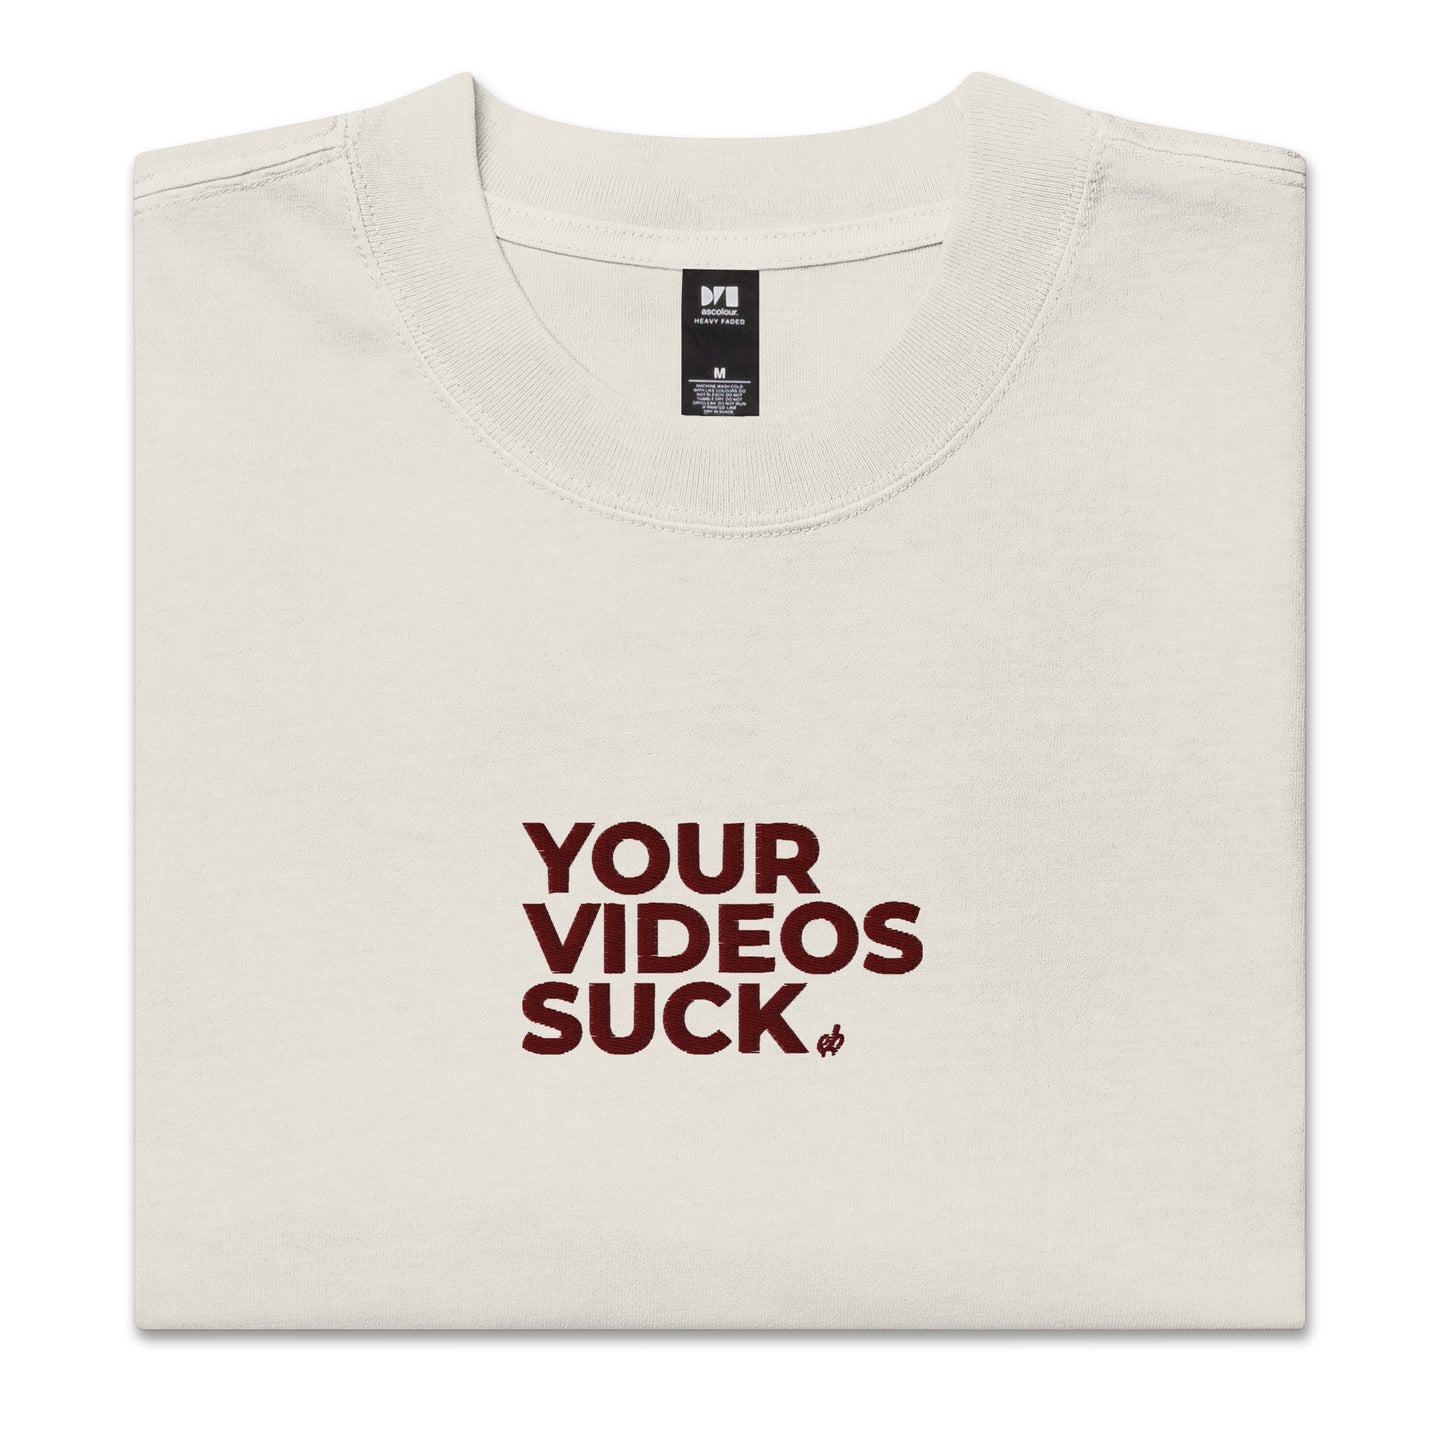 Your Videos Suck - Oversized Faded T-Shirt